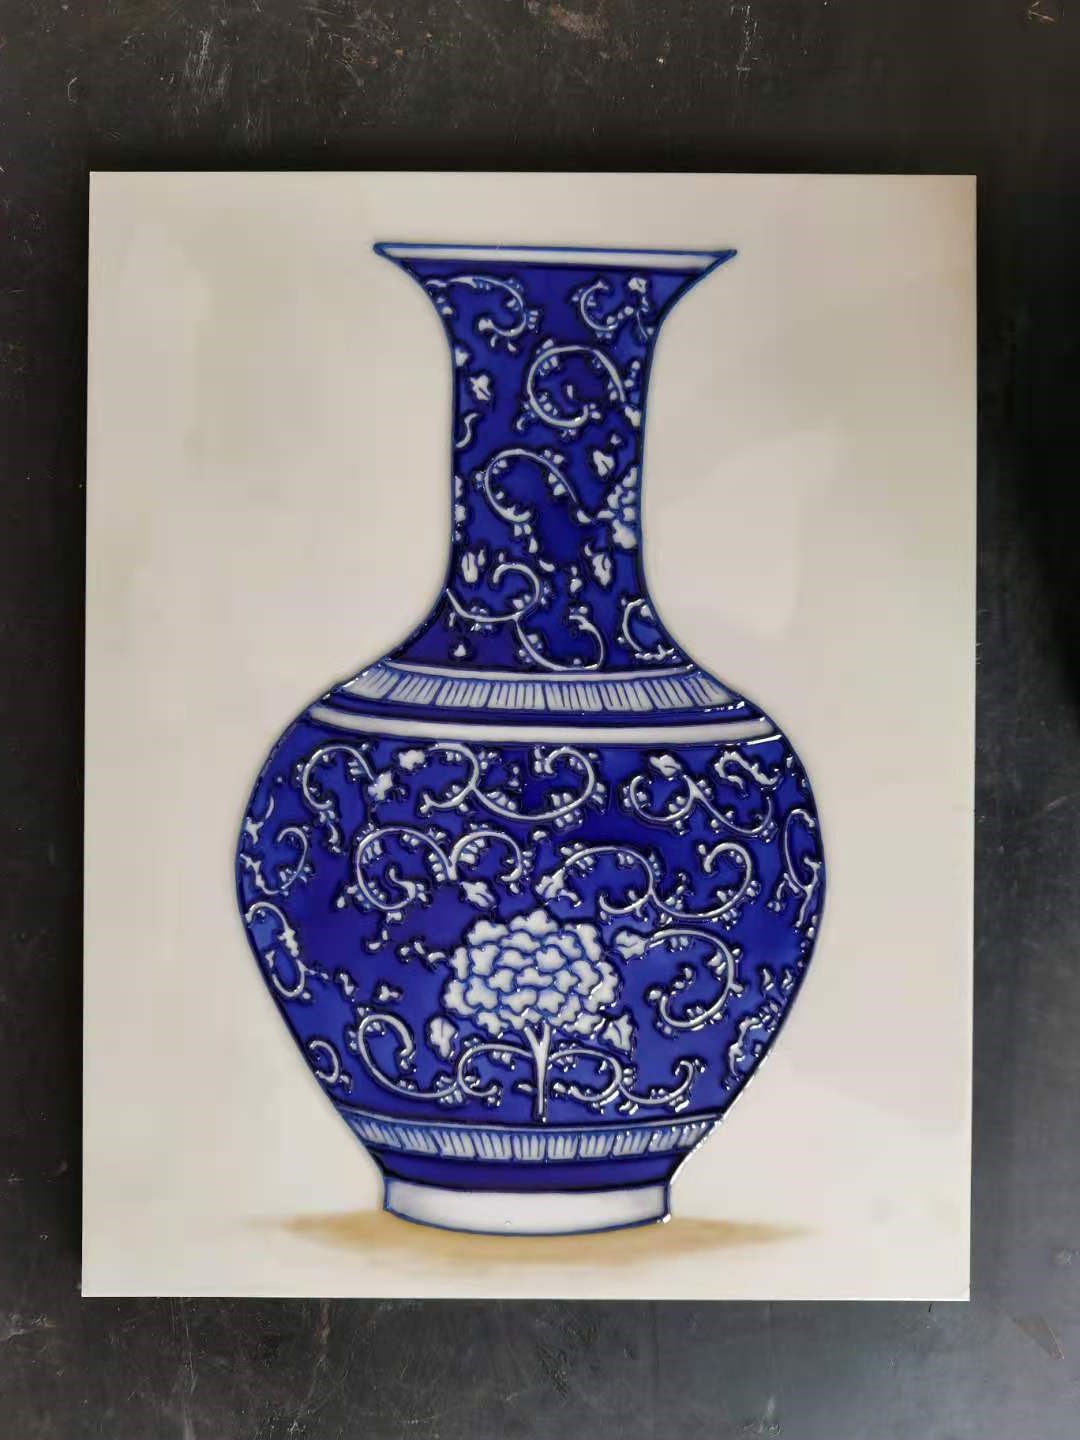 History and Art Appreciation of handpainted ceramic tiles In China